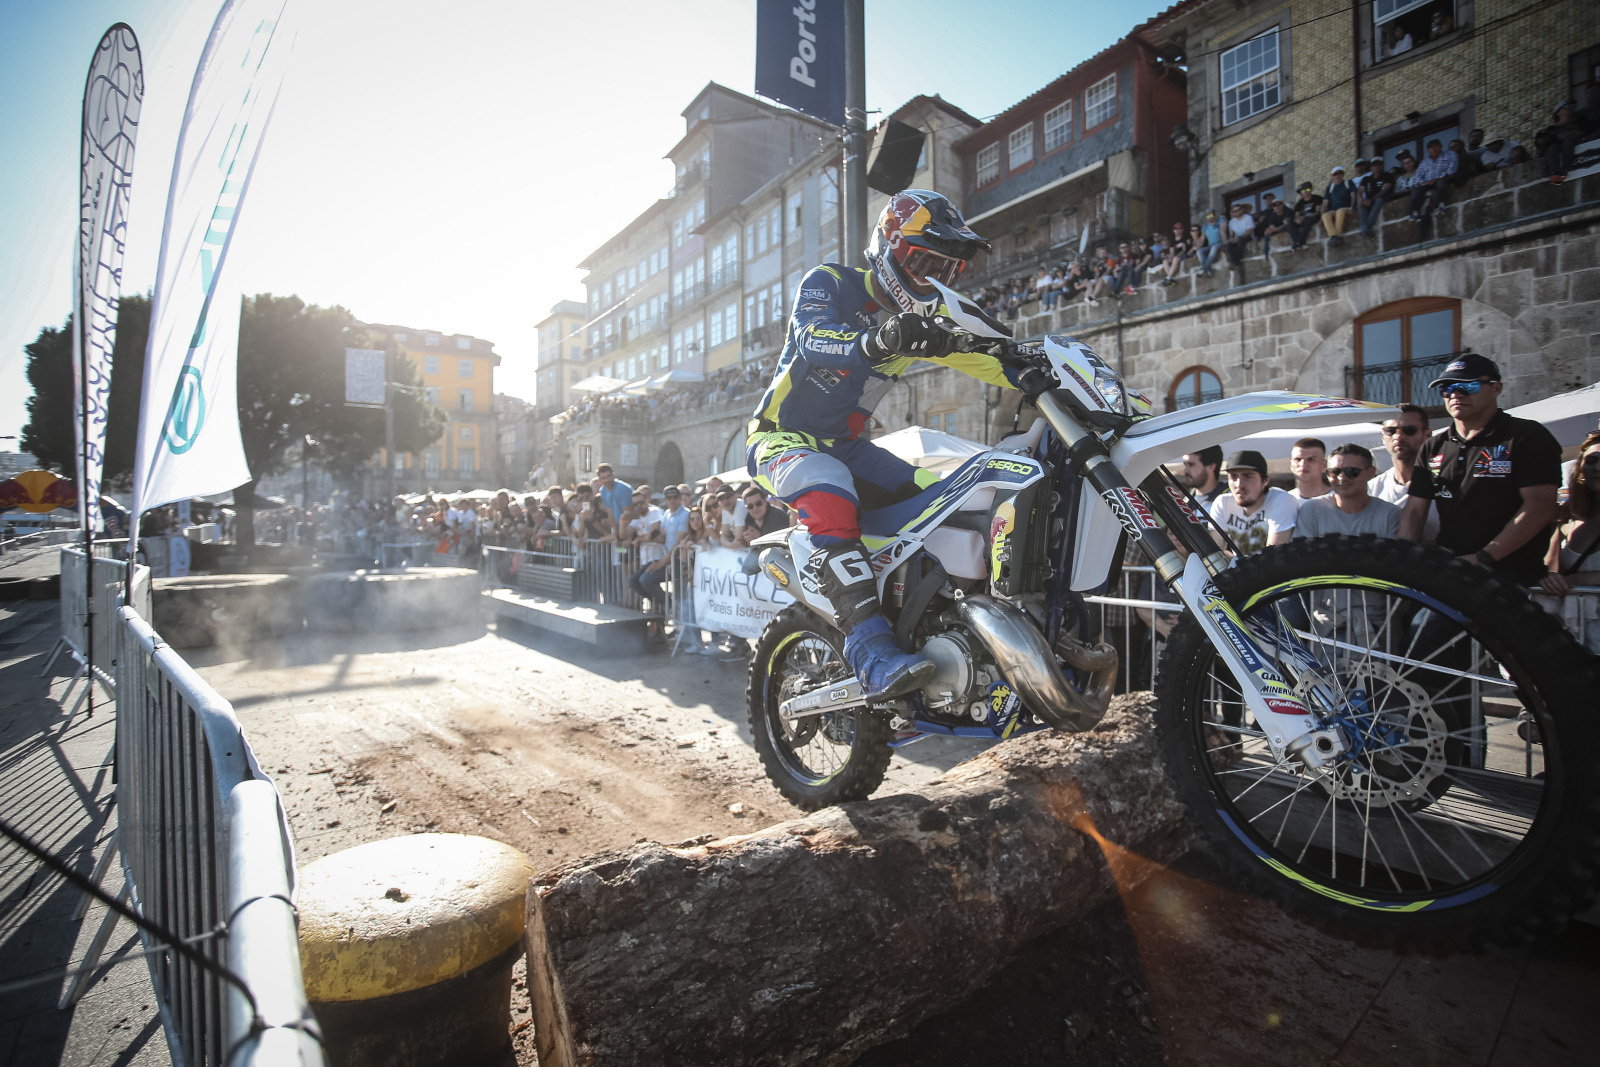 WESS round 1, Extreme Lagares in Portugal postponed 